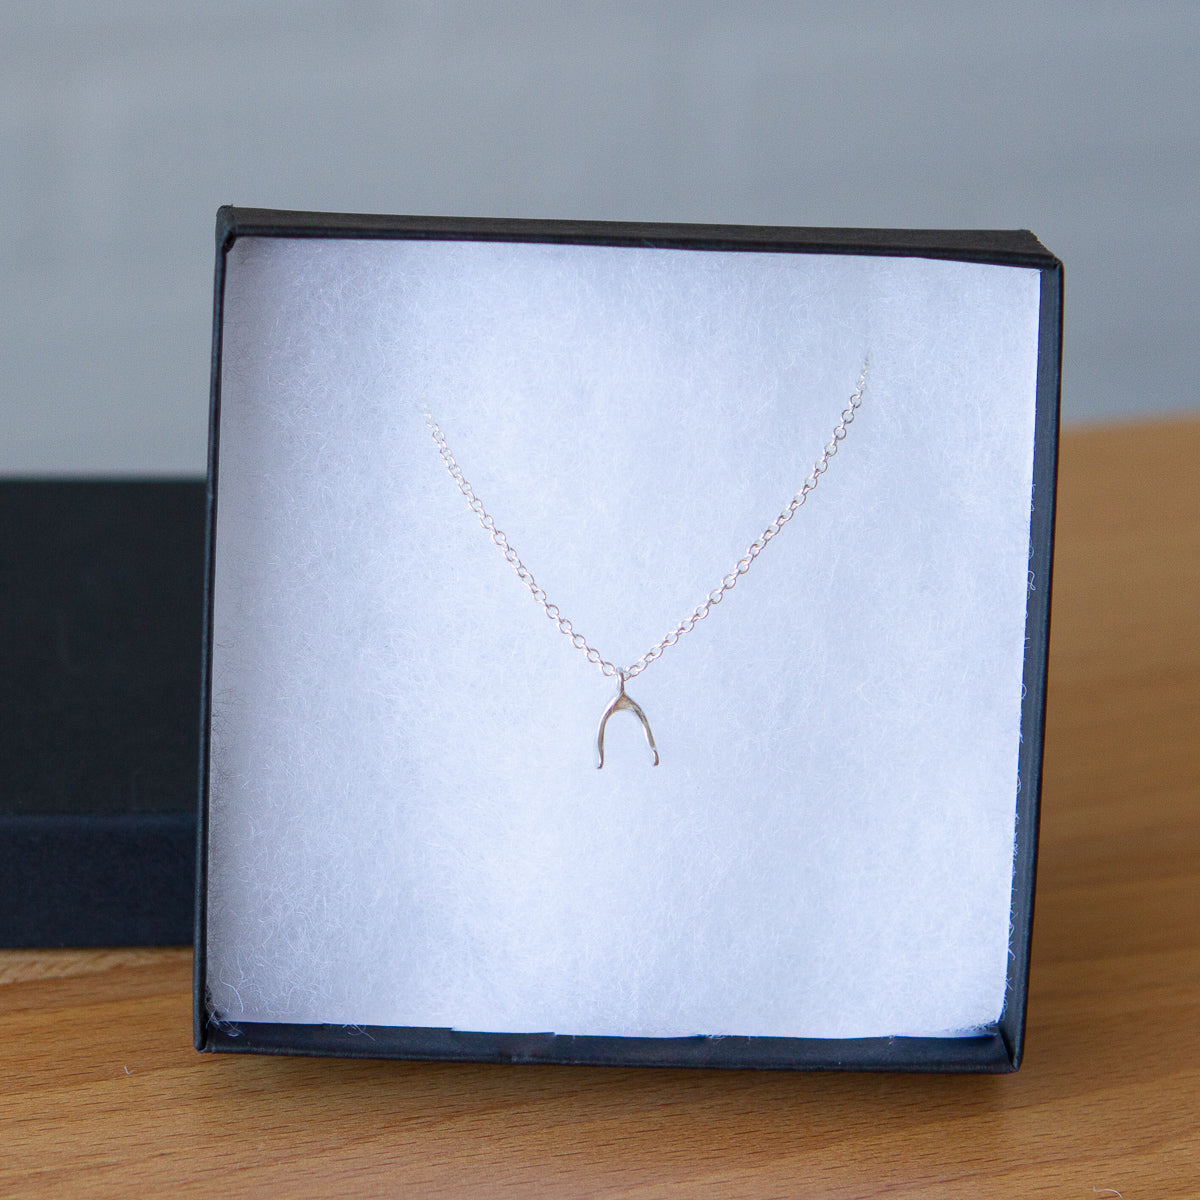 Silver Wishbone Necklace by Corey Egan in a gift box